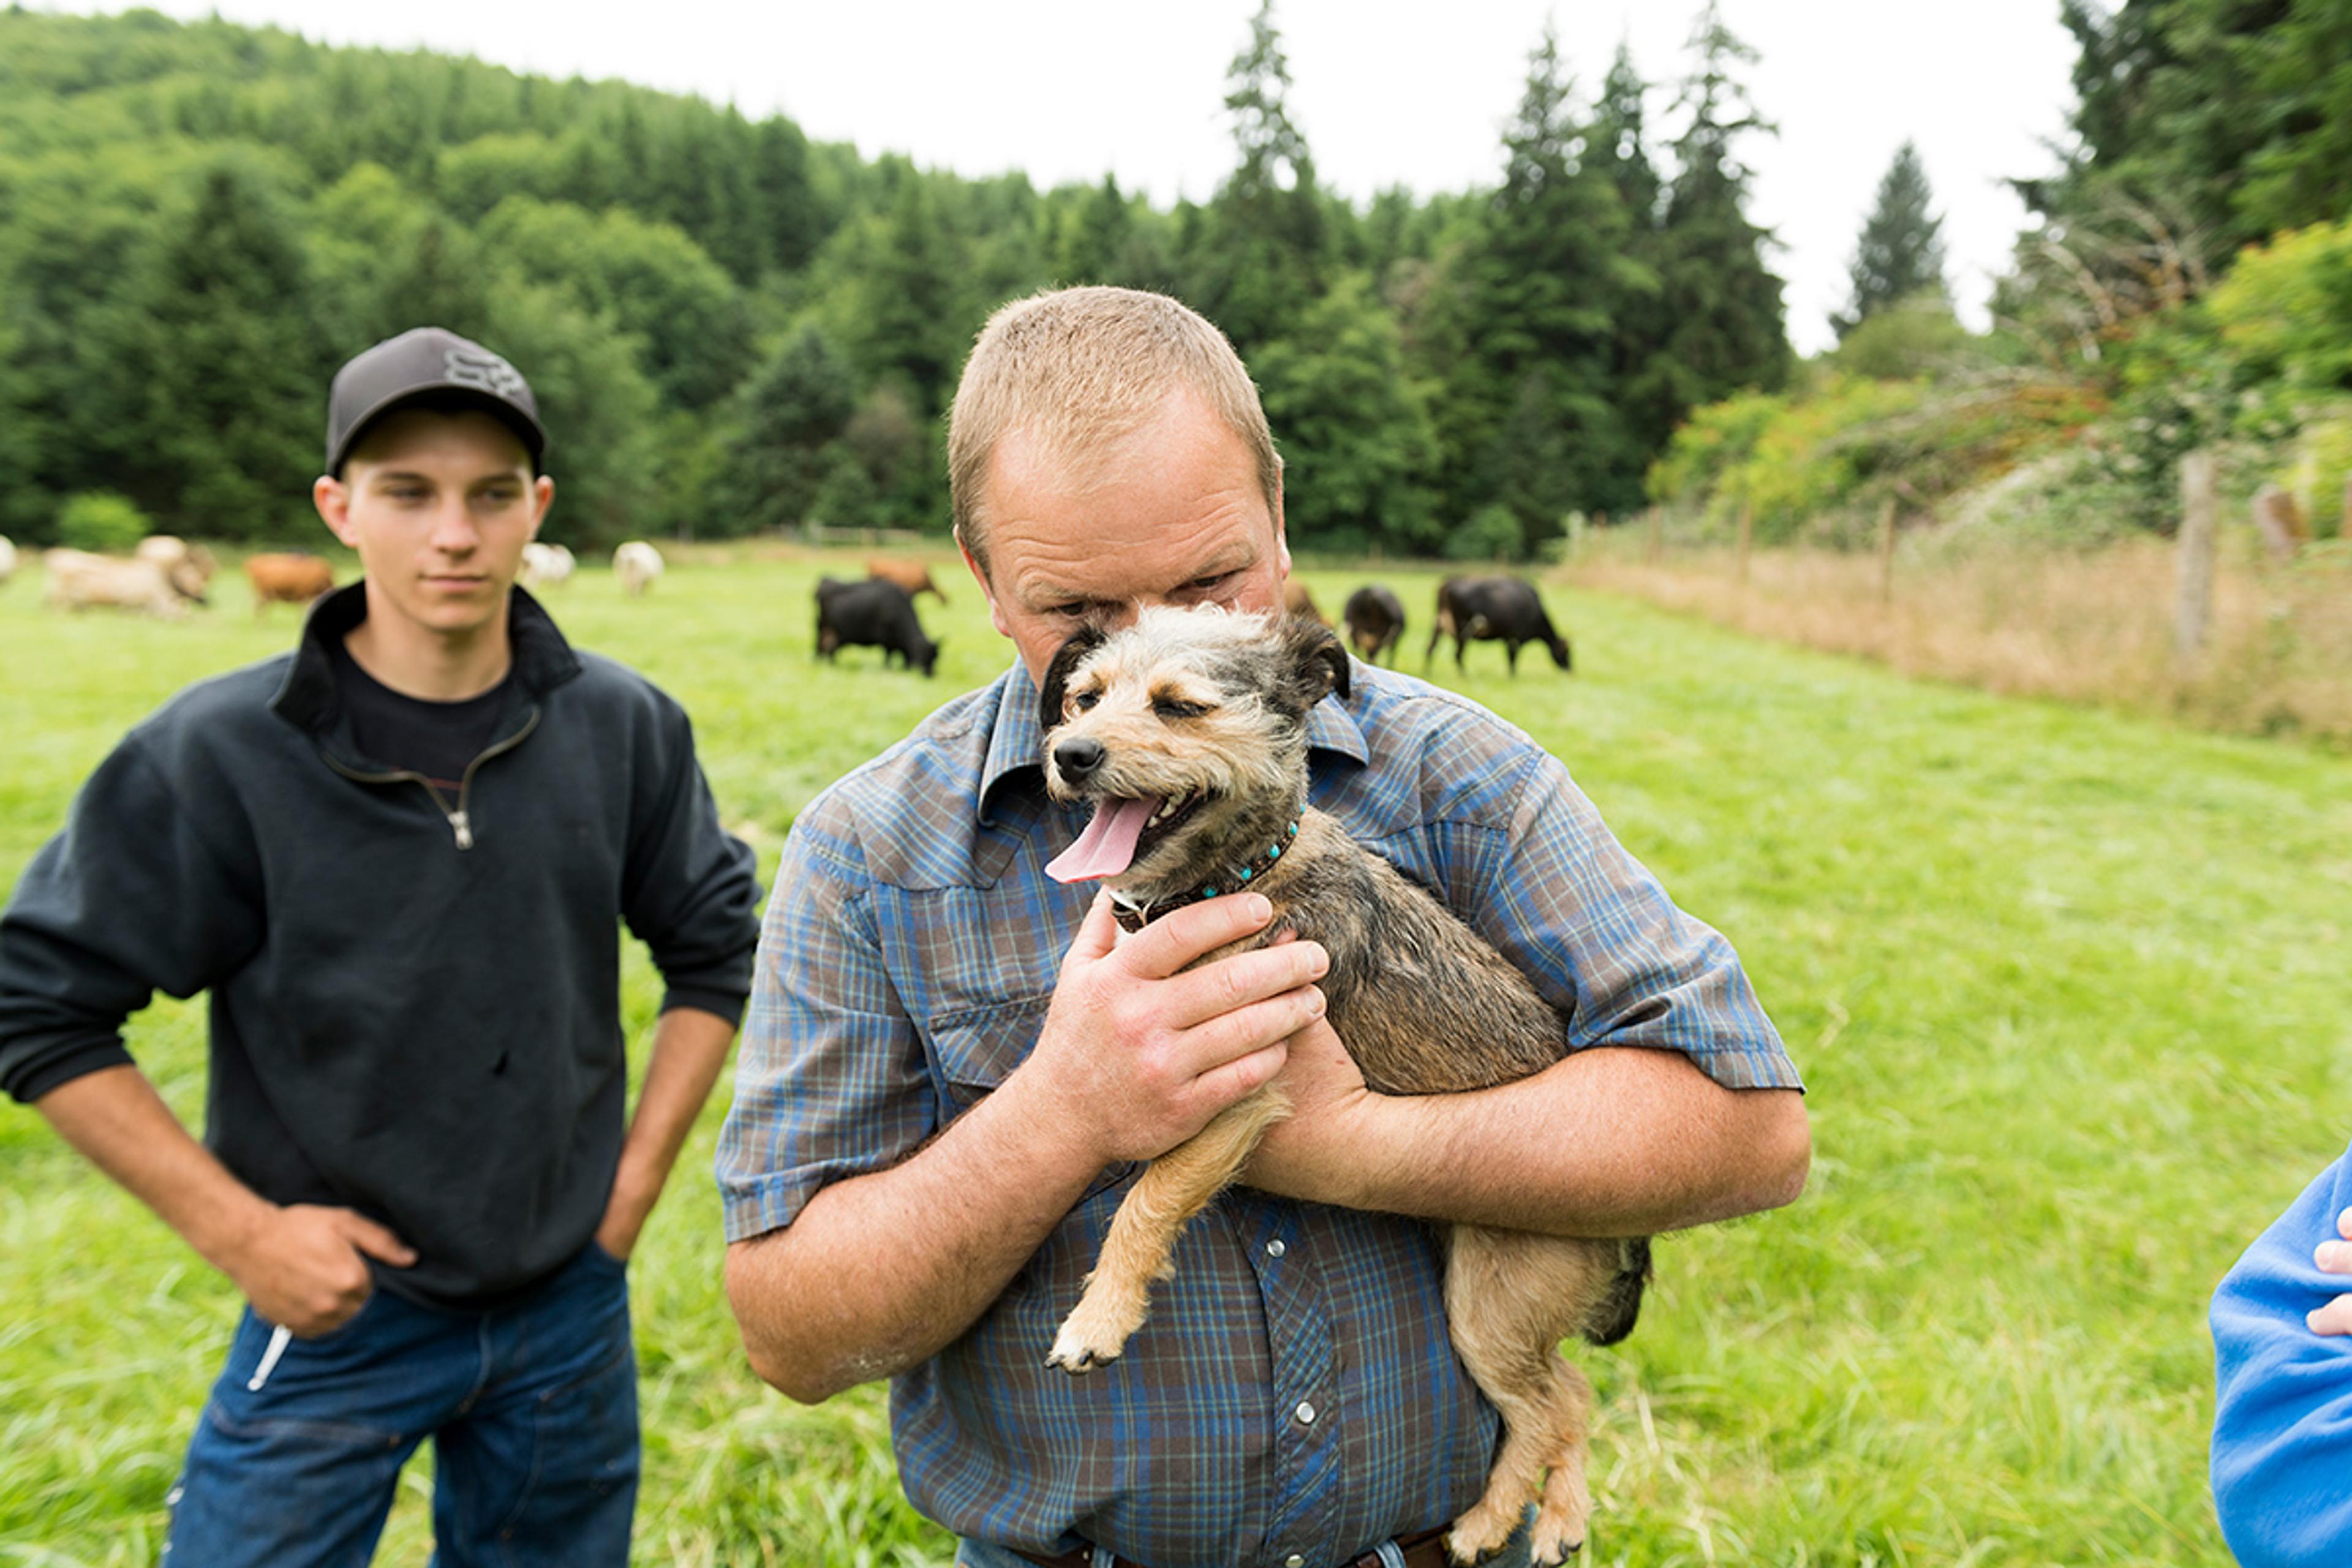 A man standing in a pasture hides his face behind a little terrier dog in his arms.